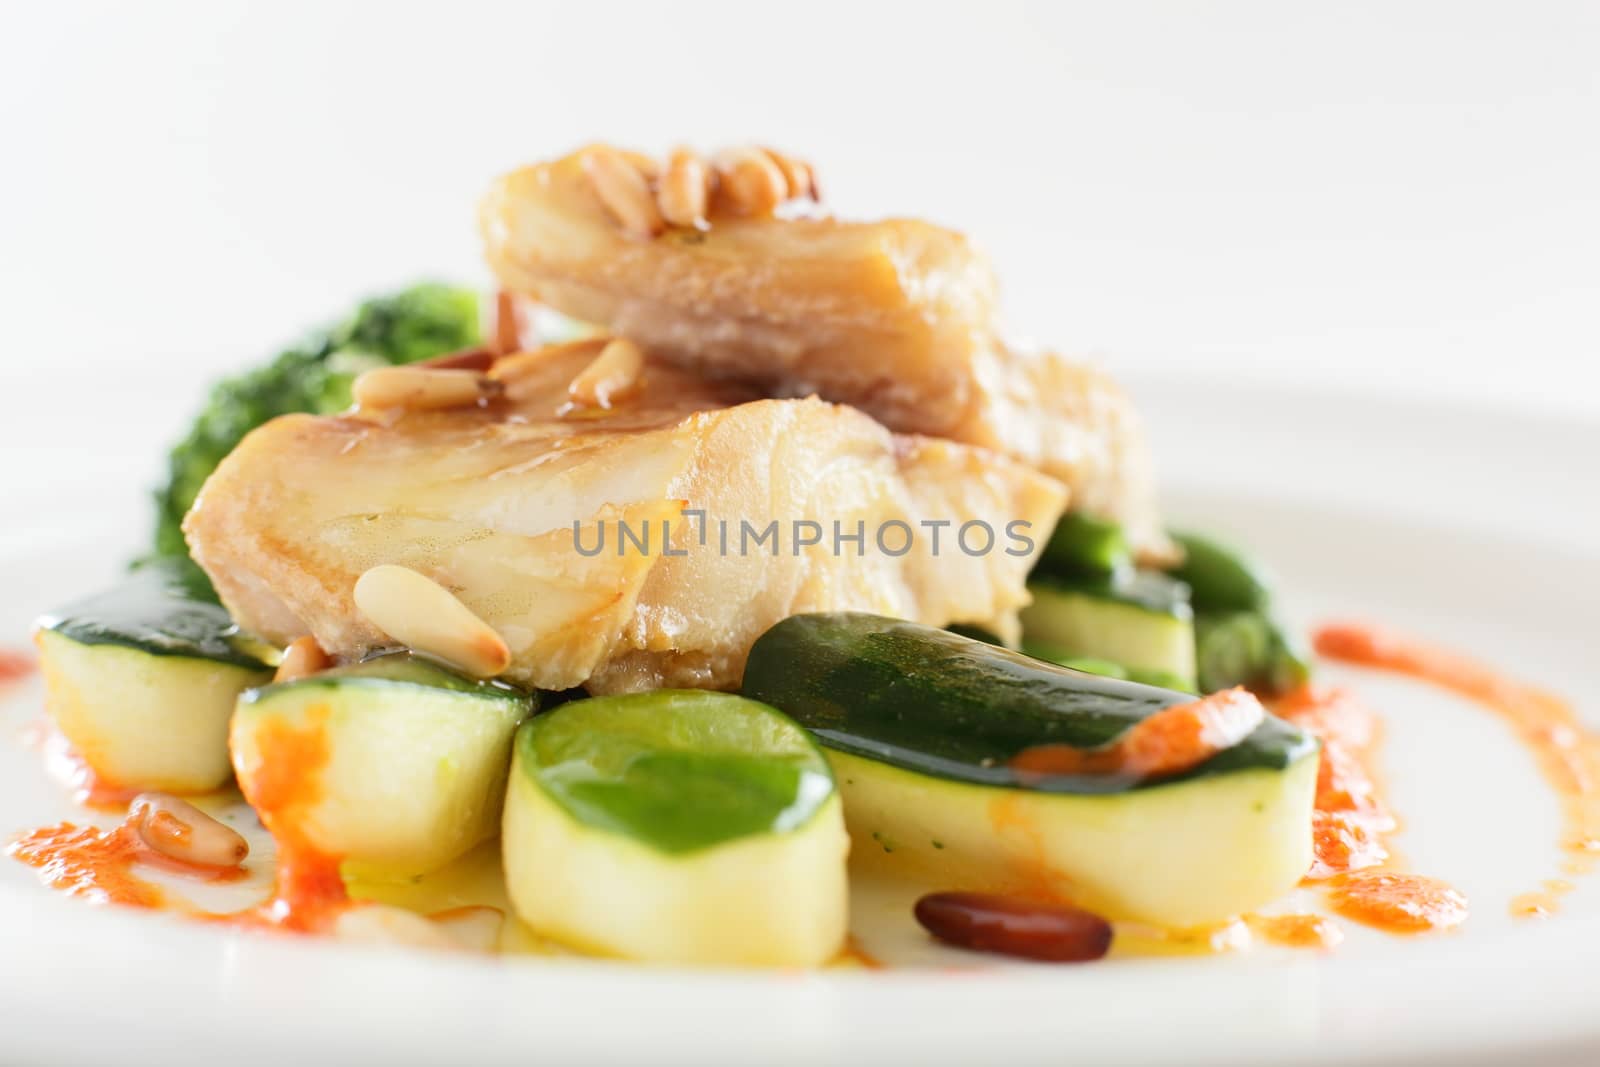 peace of fish with garnish by fiphoto